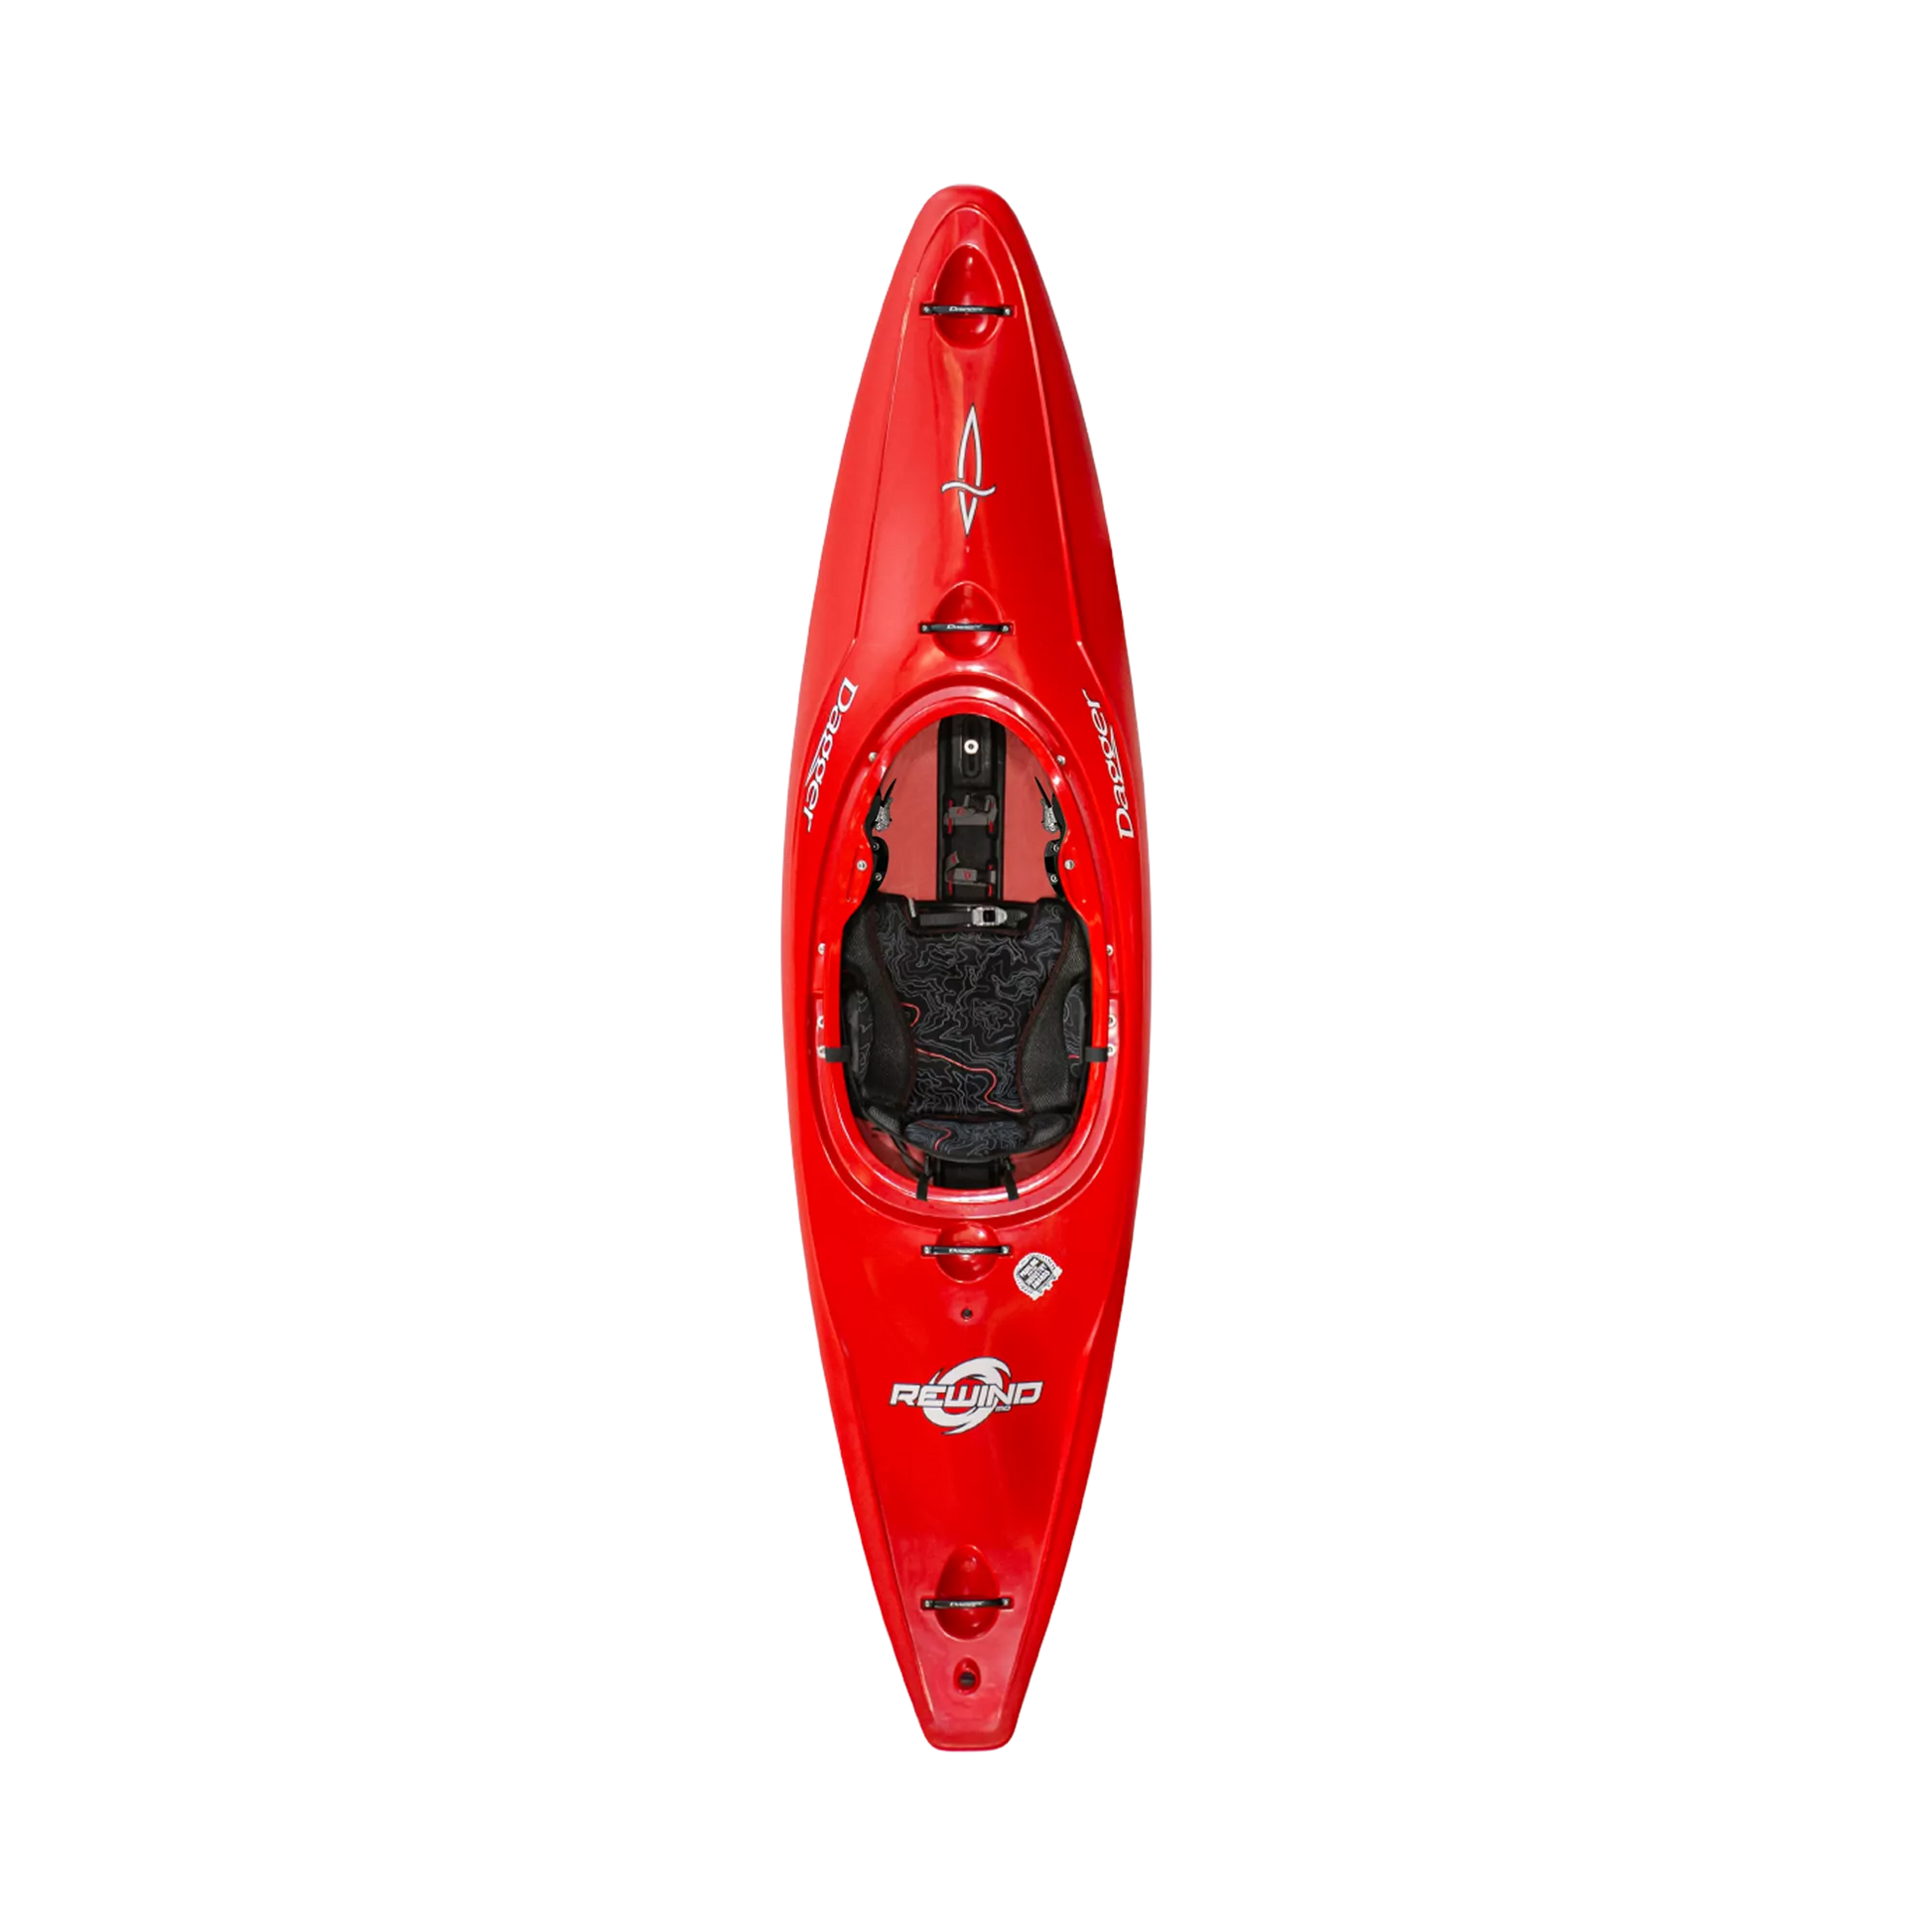 A red Dagger Rewind whitewater kayak on a black background.